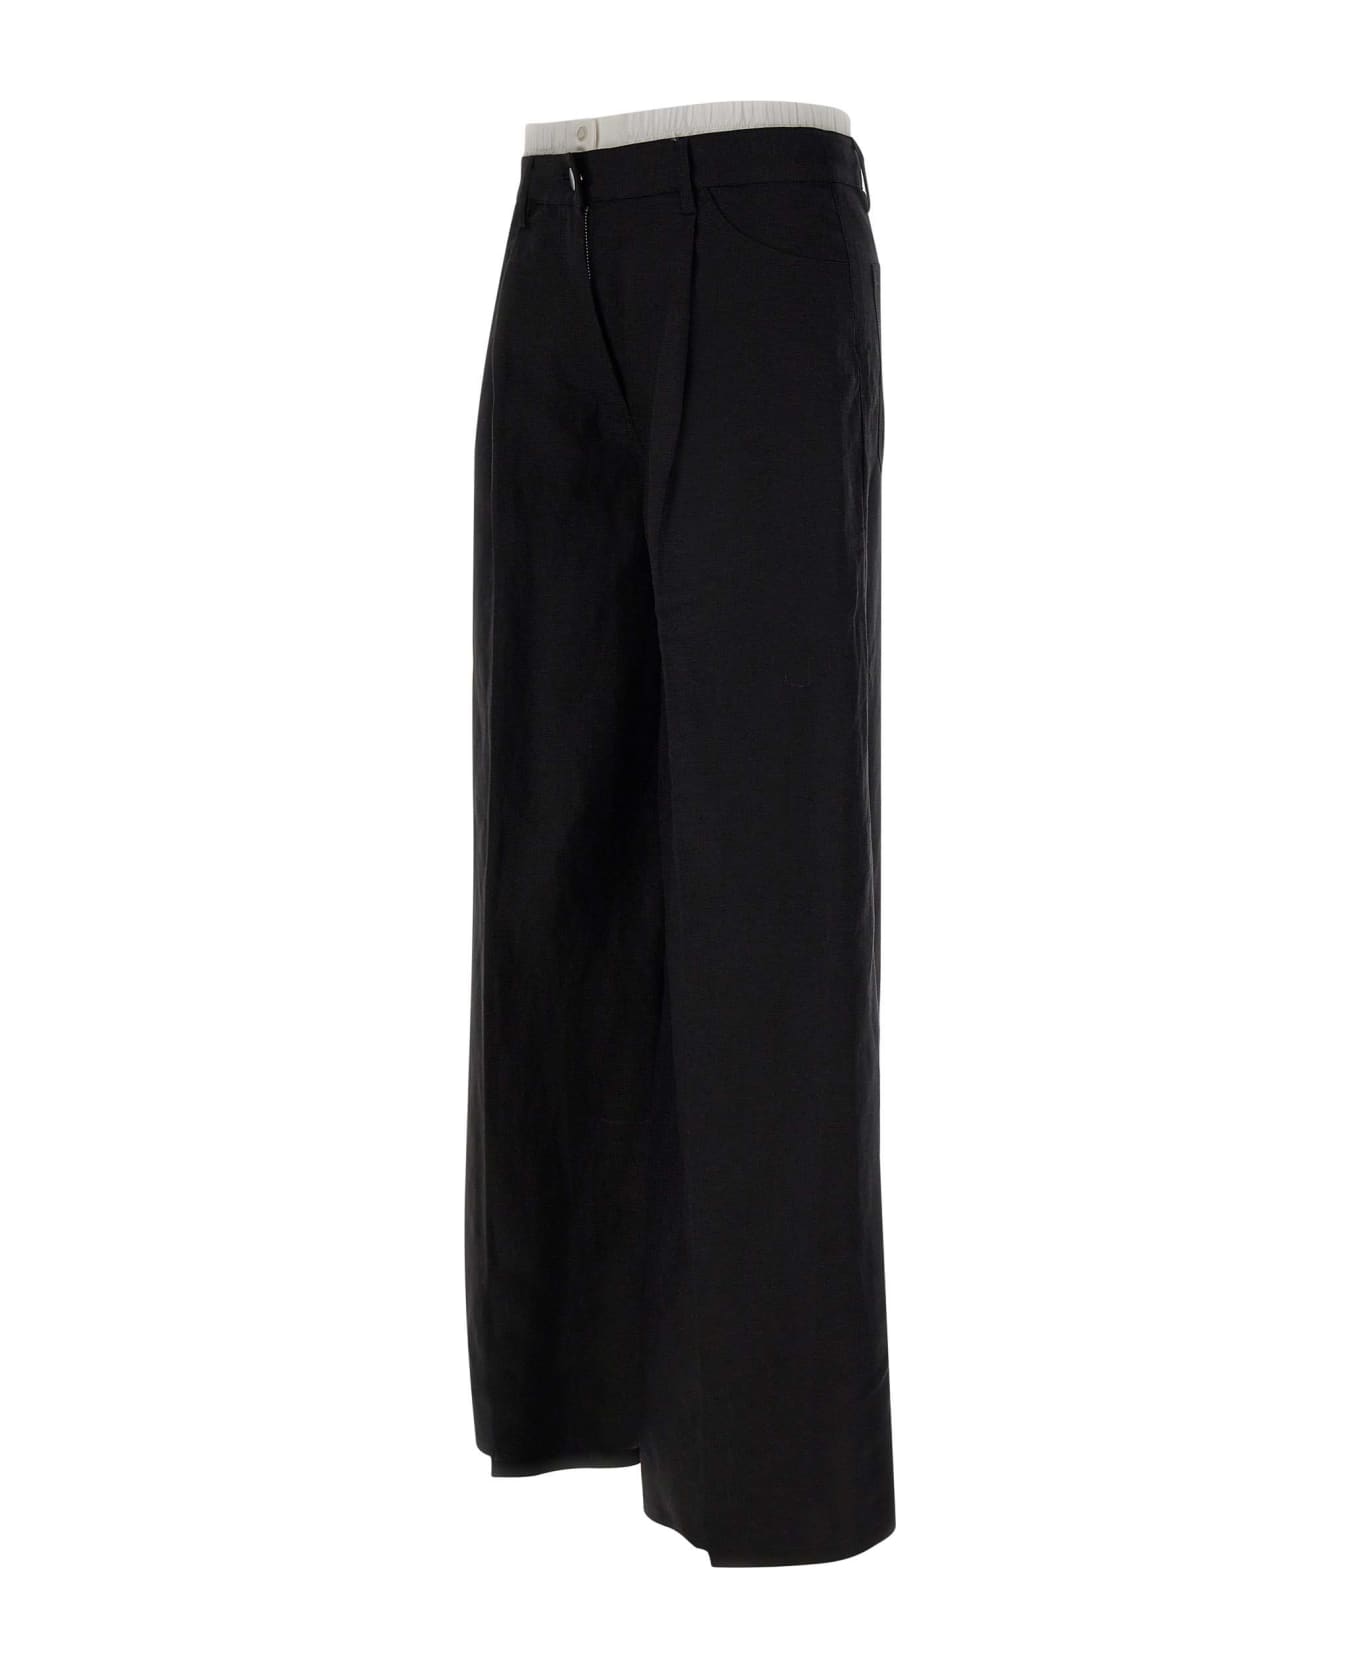 REMAIN Birger Christensen Linen And Viscose Trousers - BLACK ボトムス